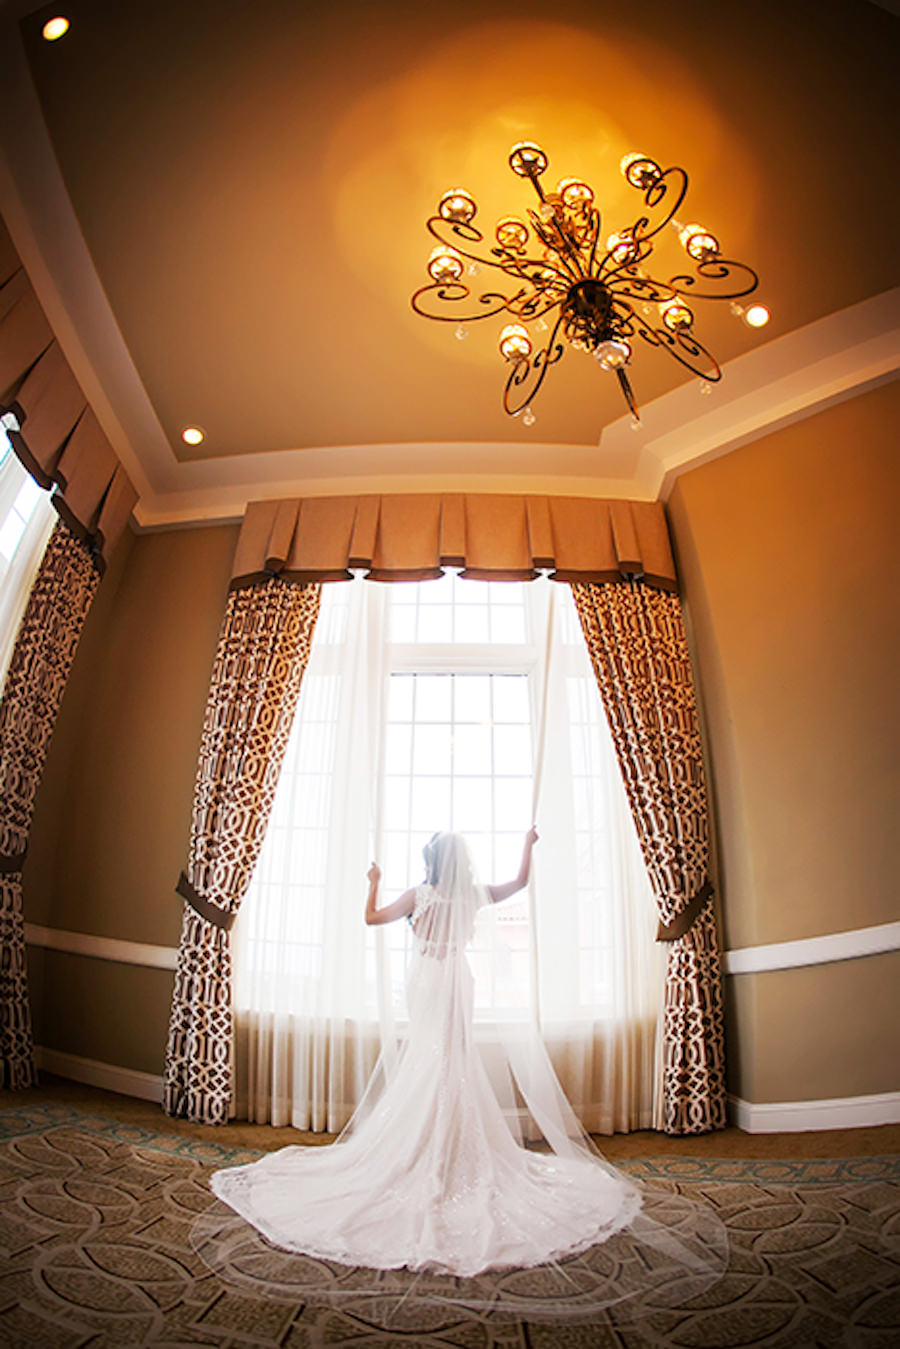 Bridal Wedding Day Portrait in Lace Backless Wedding Dress with Chapel Train and Cathedral Veil at St Petersburg Wedding Venue The Don Cesar | Wedding Photography by Limelight Photography